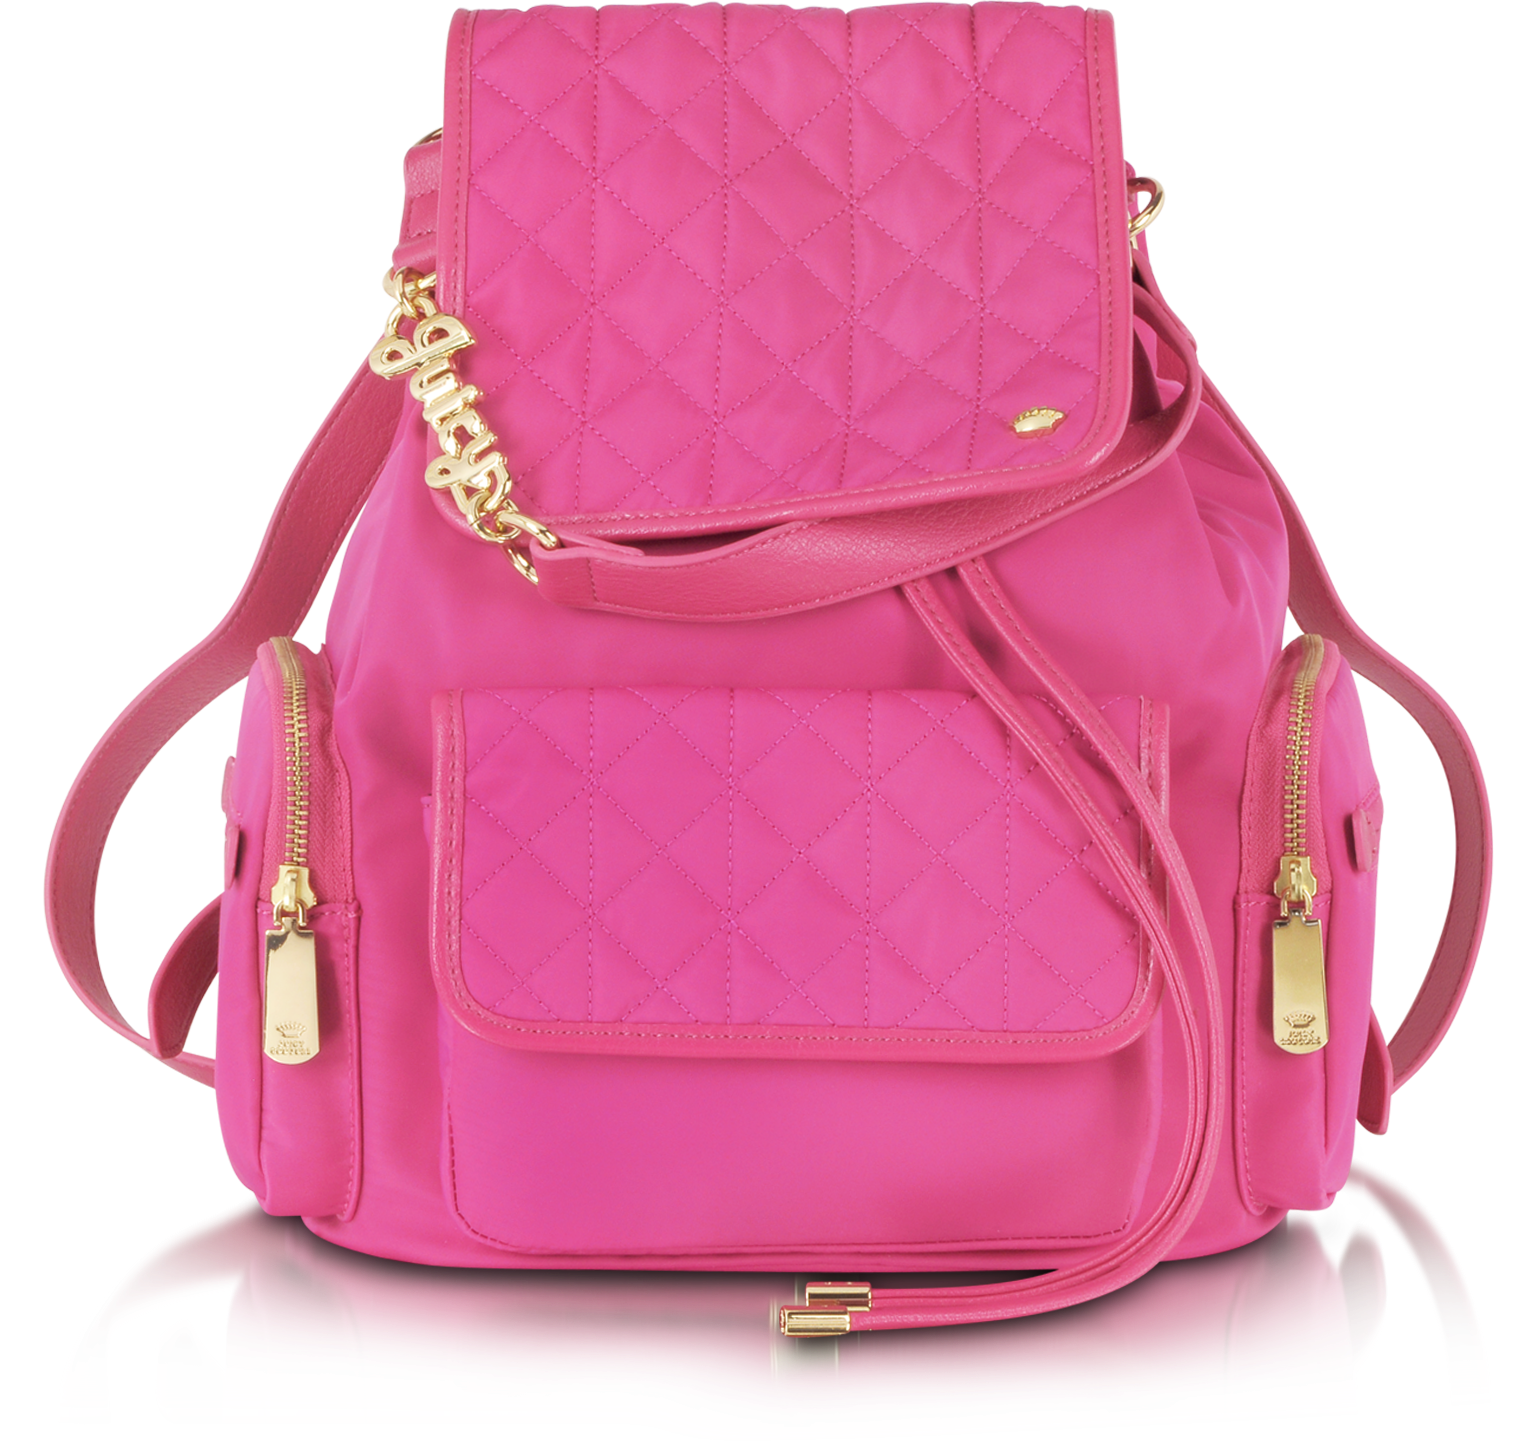 Juicy Couture Larchmont Nylon Mini Backpack at FORZIERI